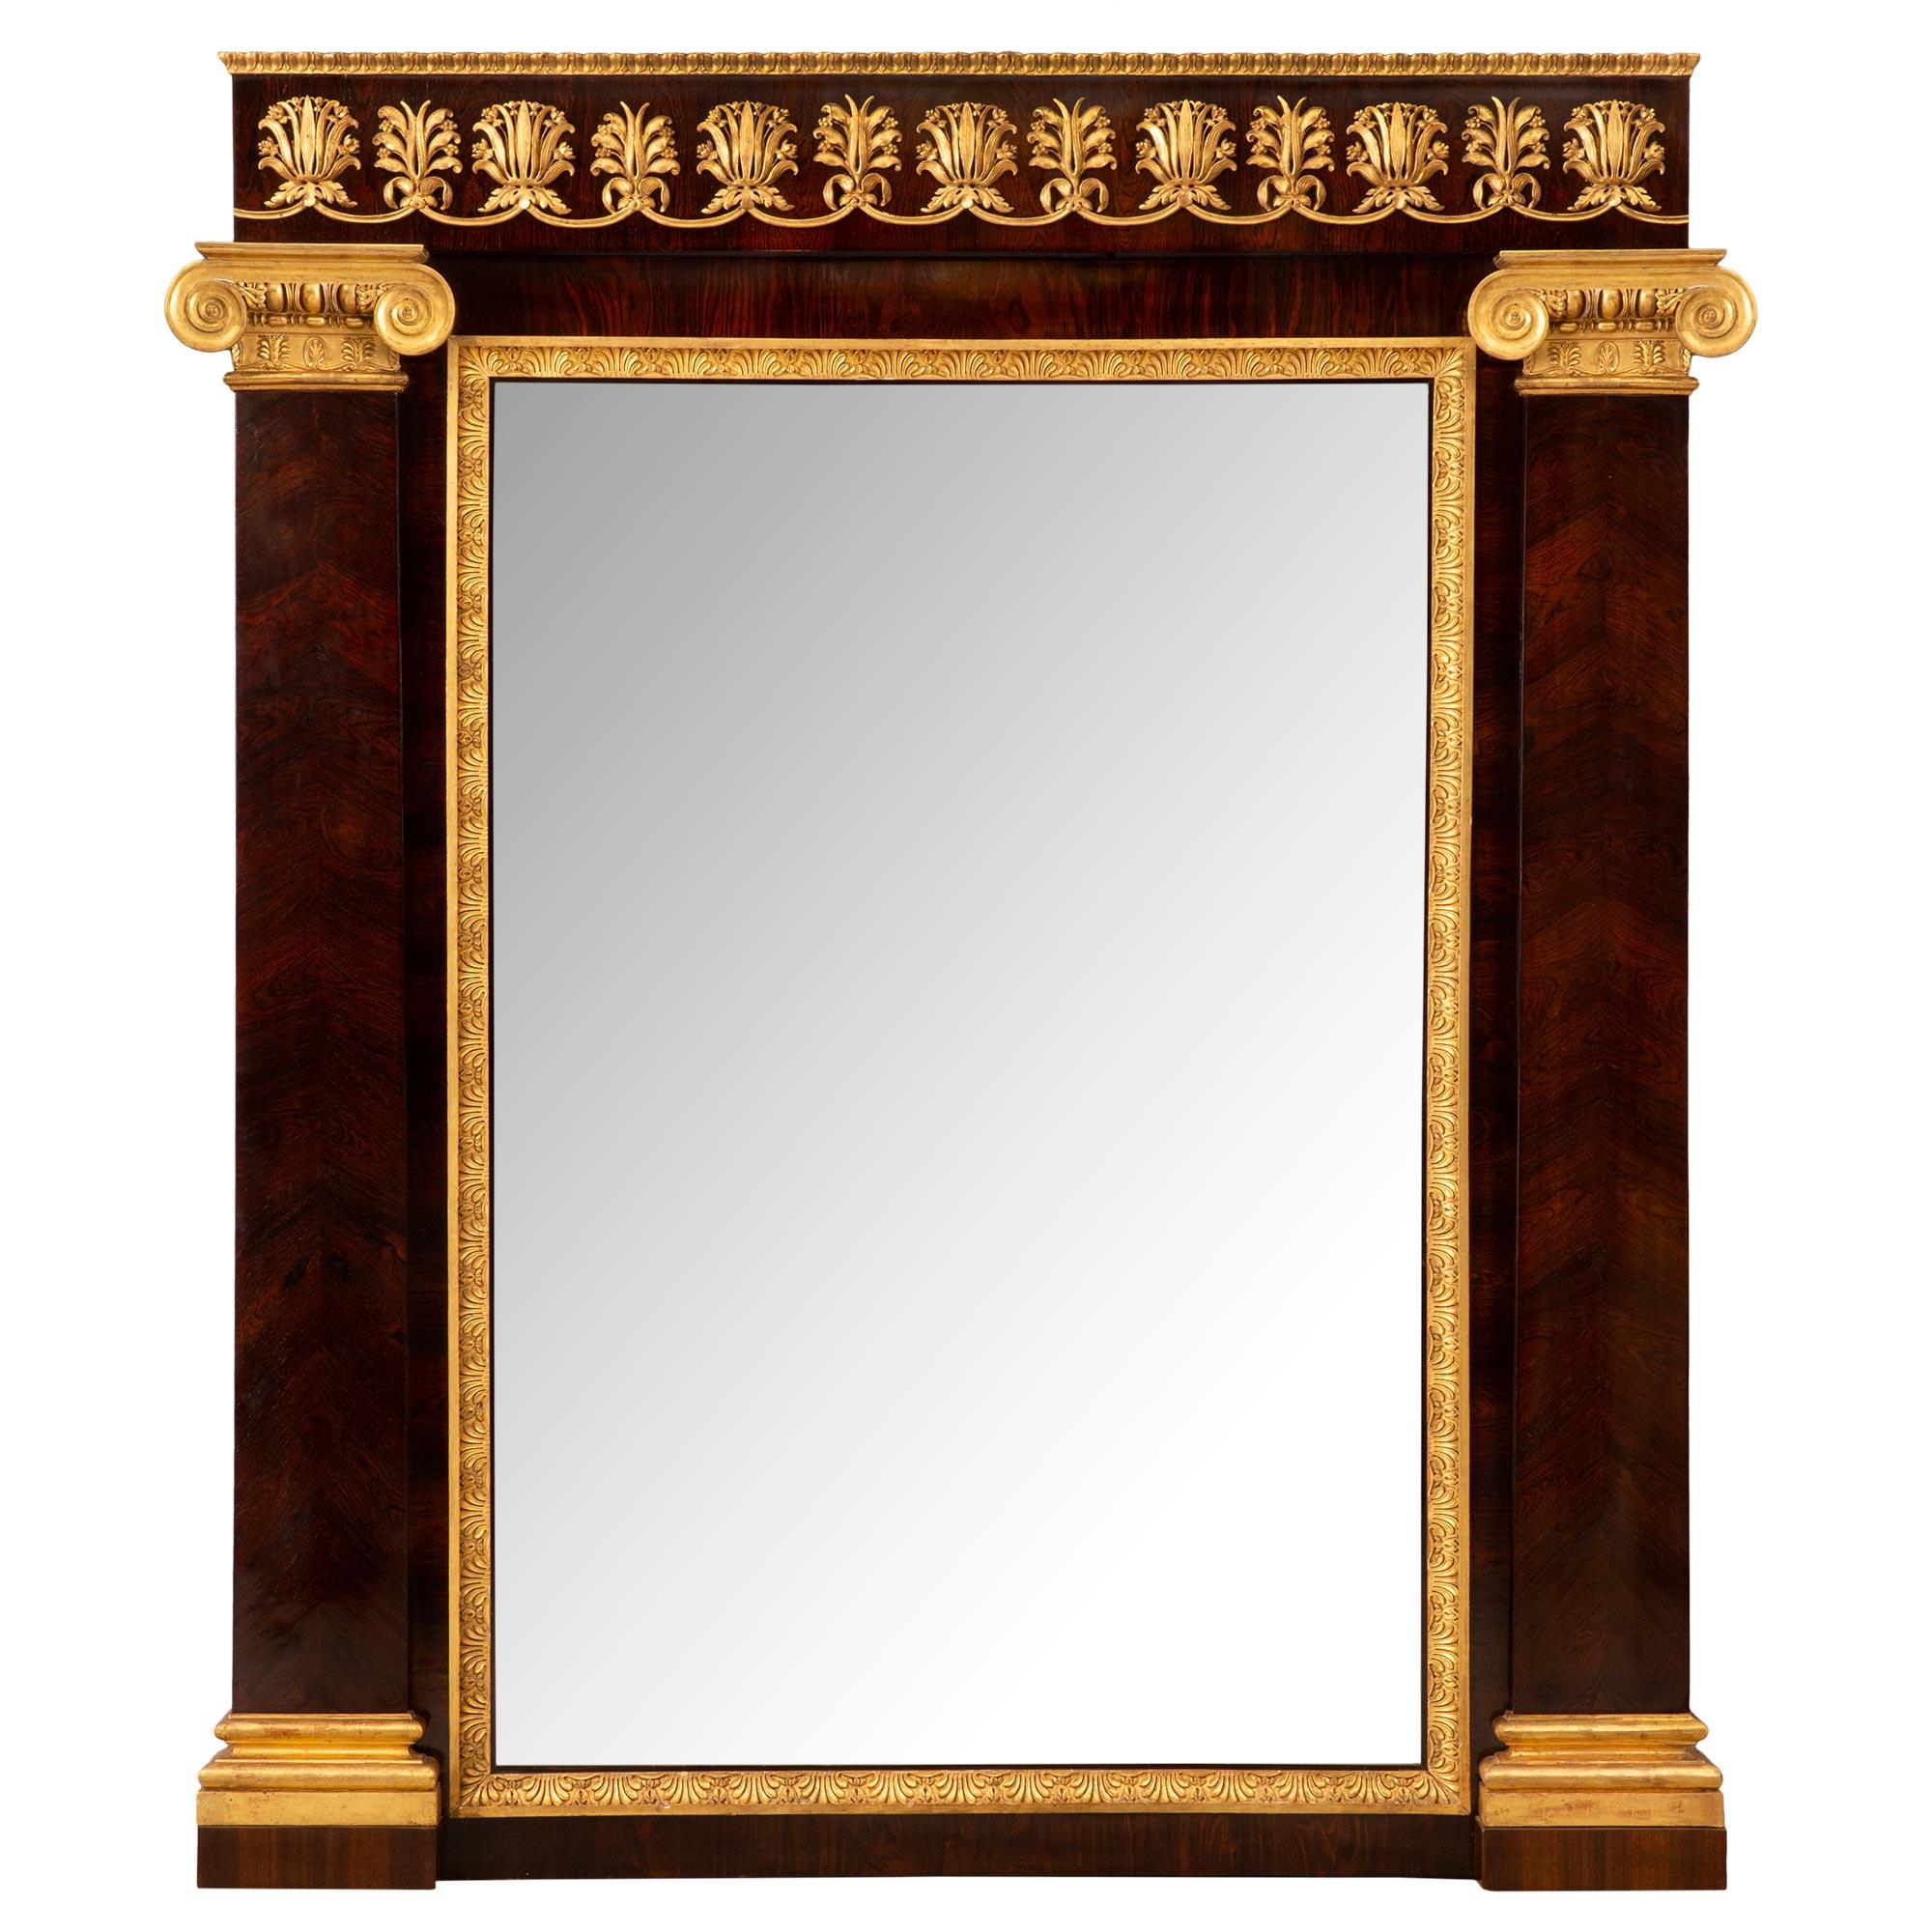 A handsome and high quality Italian mid 19th century neo-classical st. rosewood and giltwood mirror. The mirror plate is set within a beautiful and most decorative mottled giltwood band with striking palmettes designs. Leading up each side are